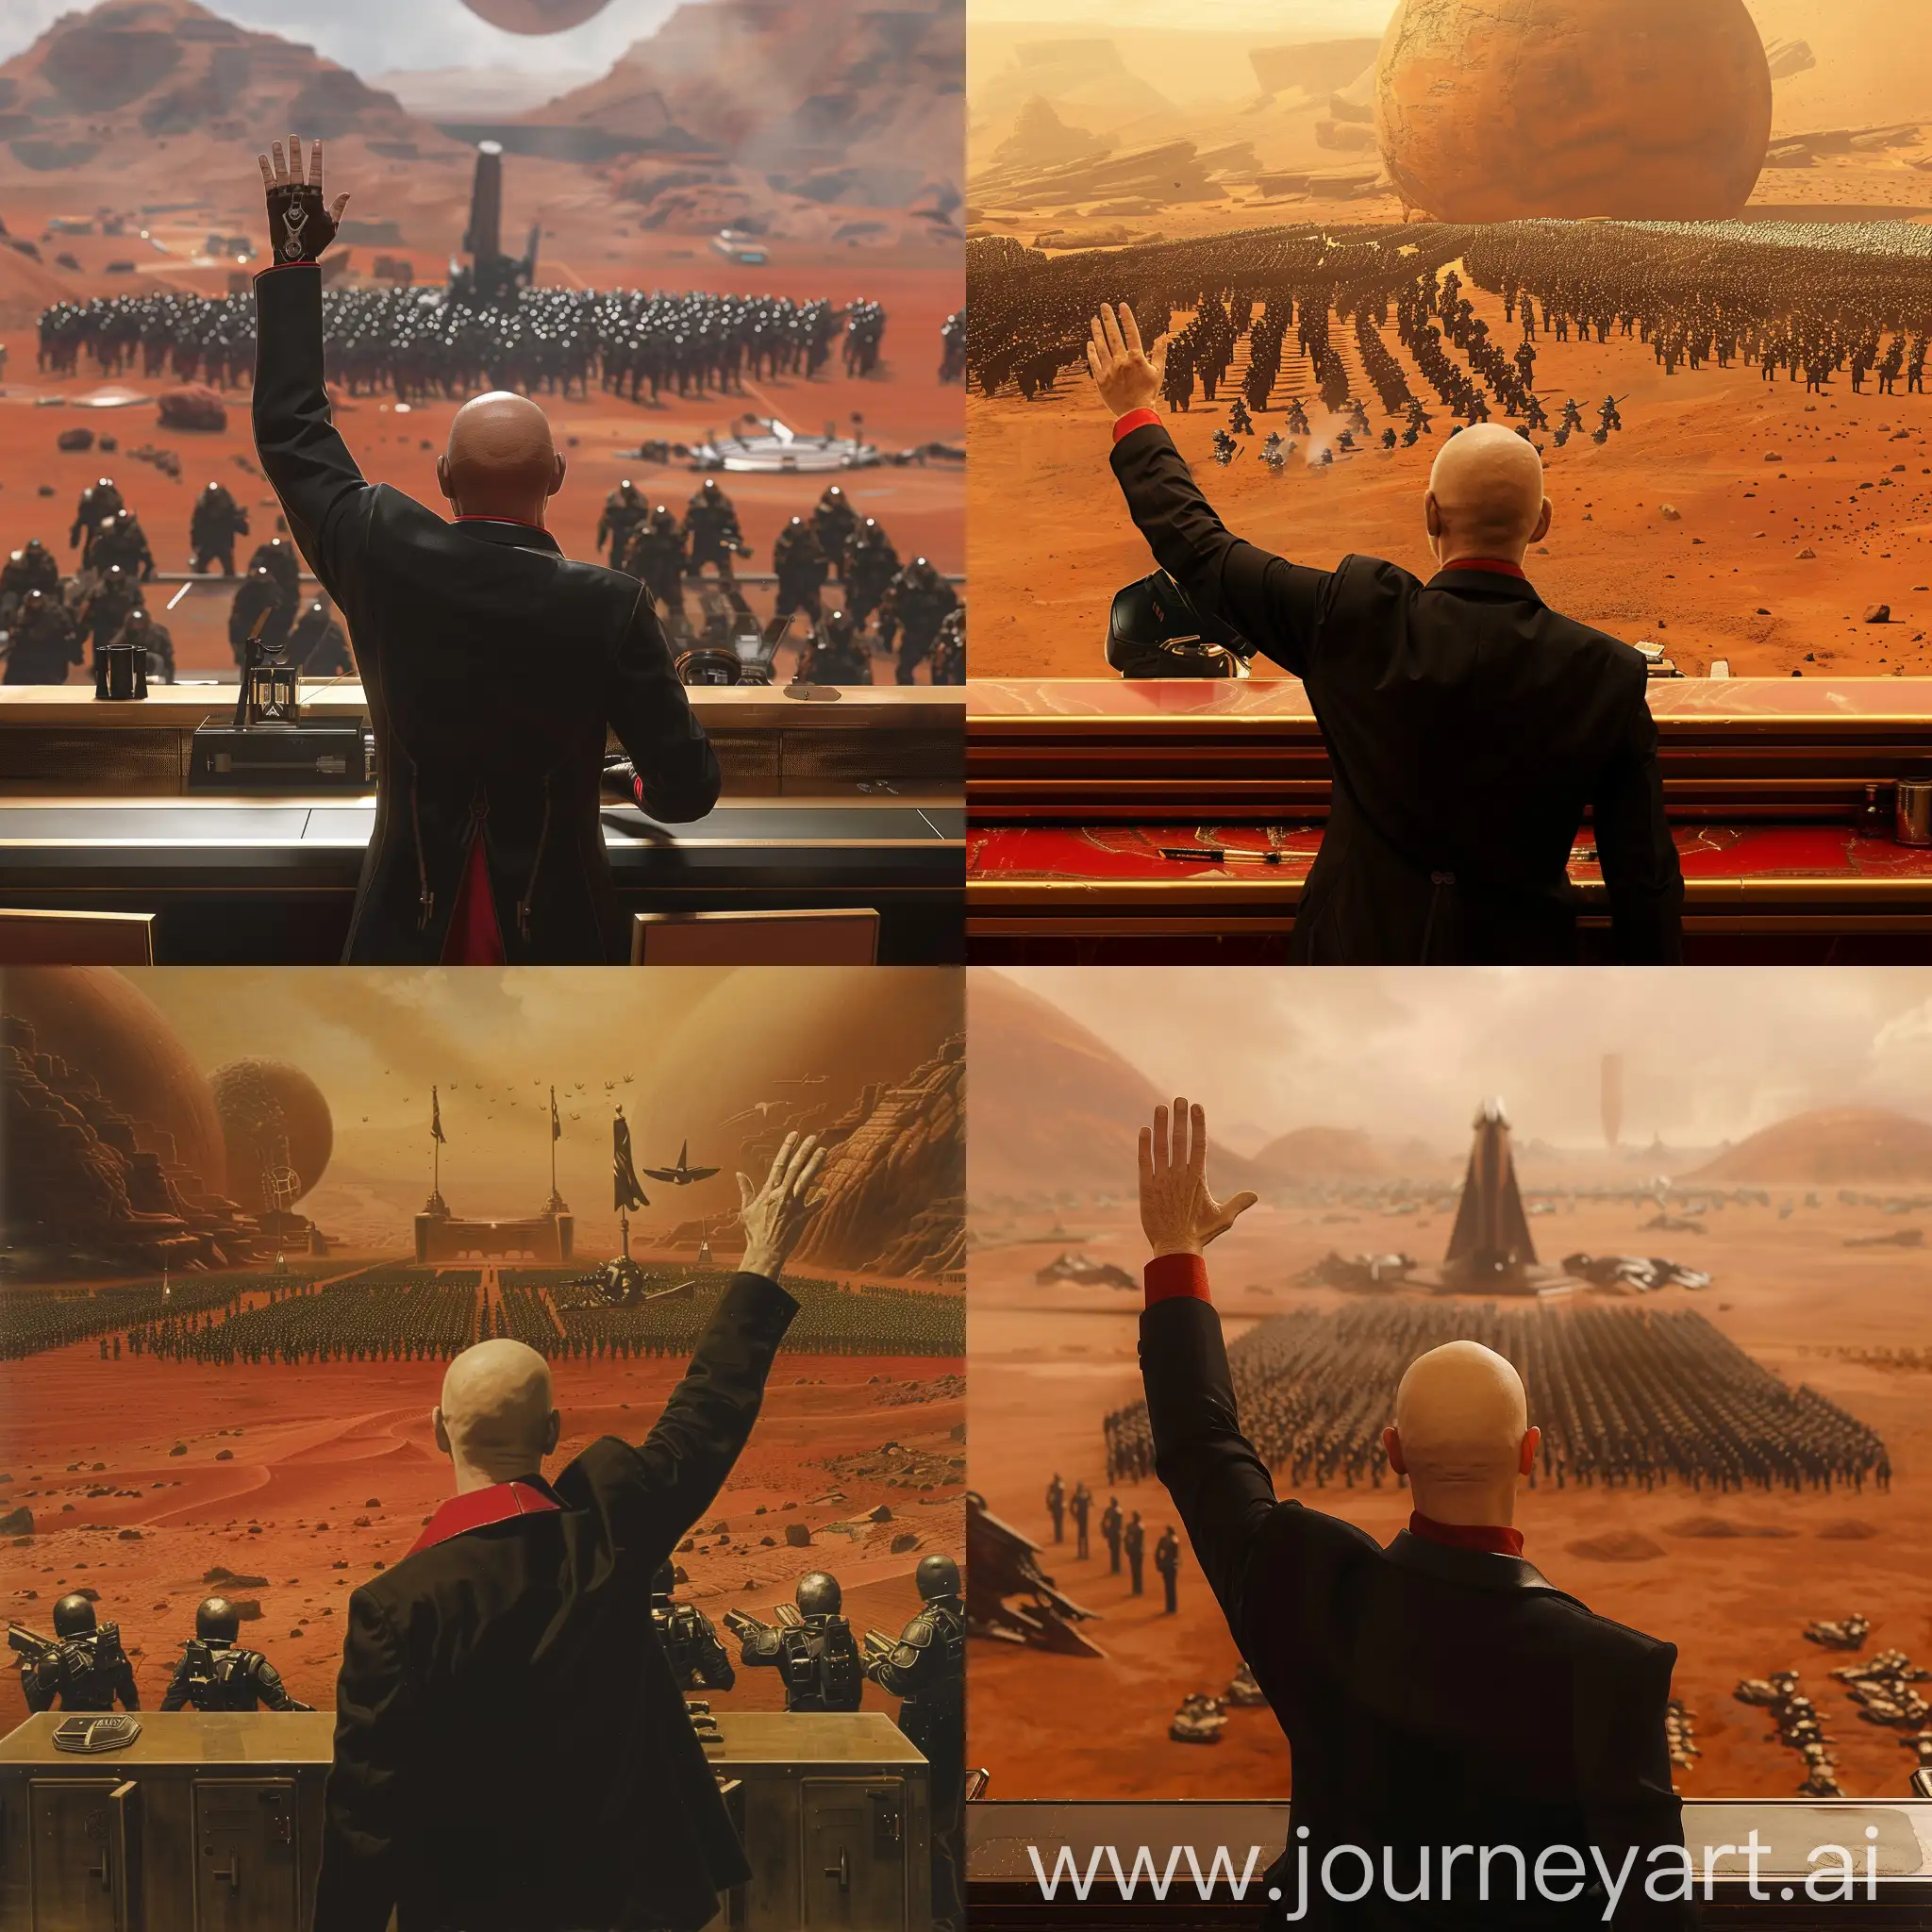 Bald-Noble-Man-Commanding-Army-on-Deserted-Red-Planet-SciFi-Style